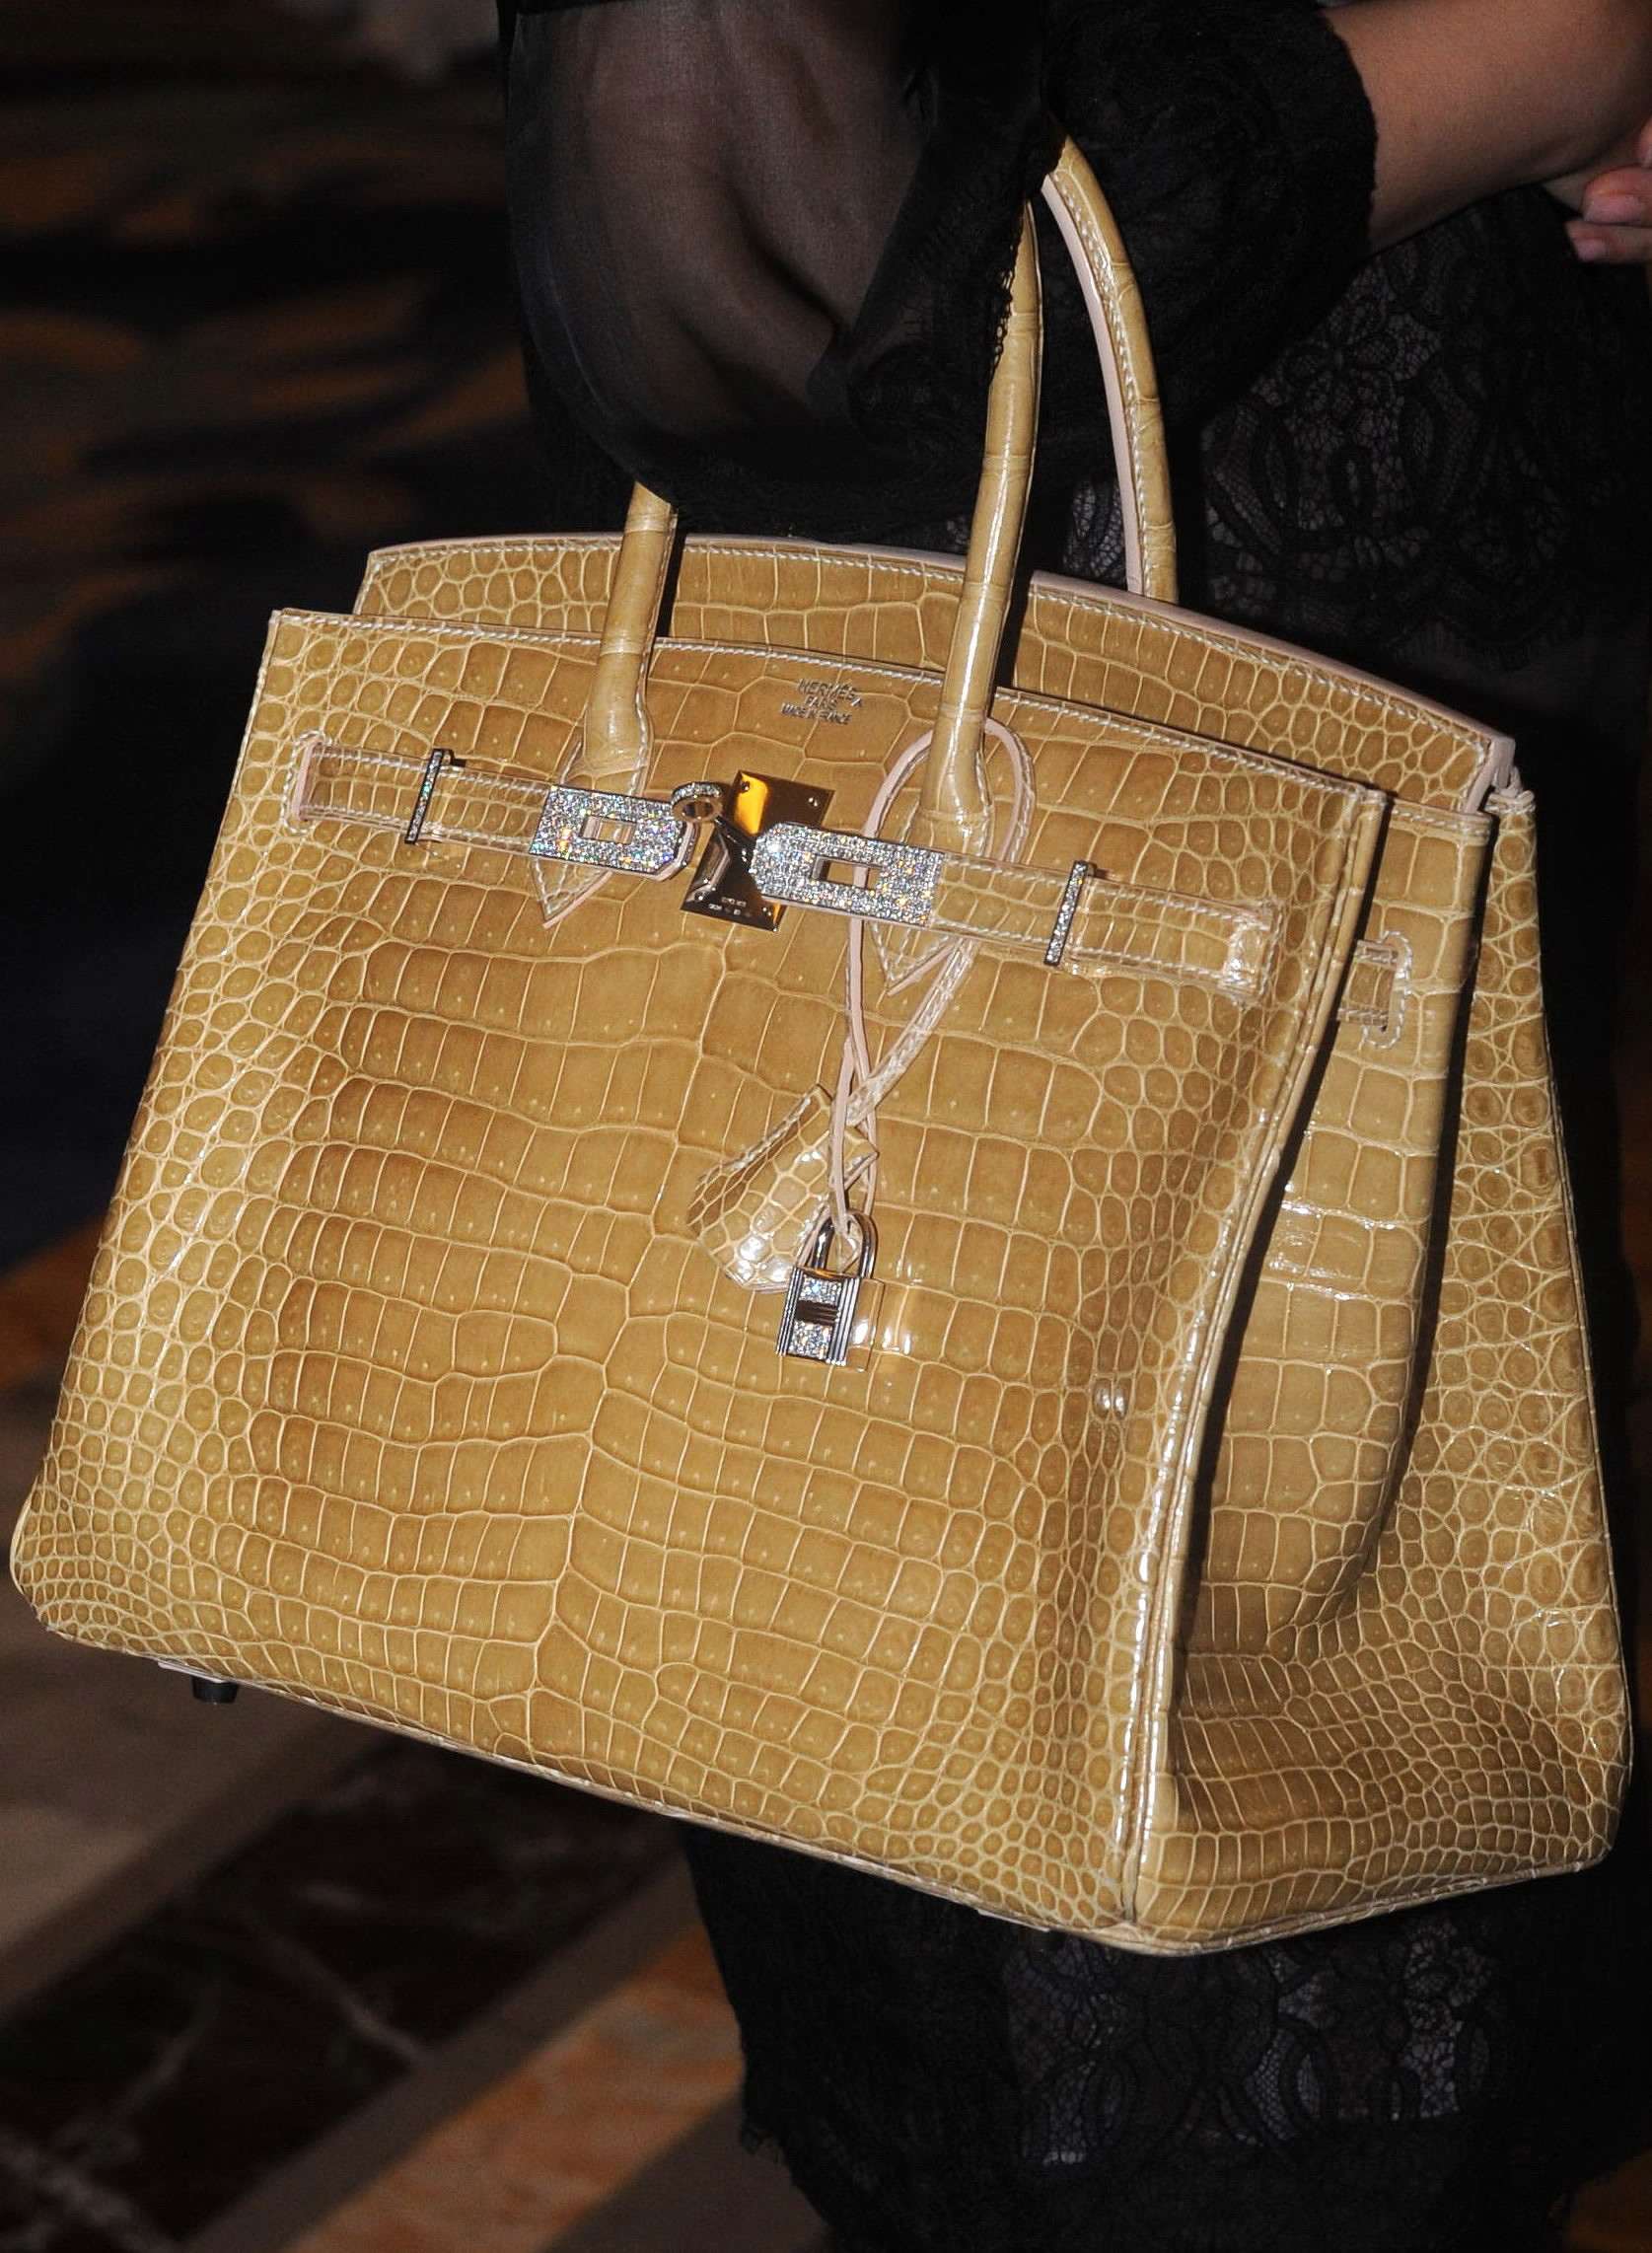 Diamond-encrusted purse sells for record $380,000 at auction